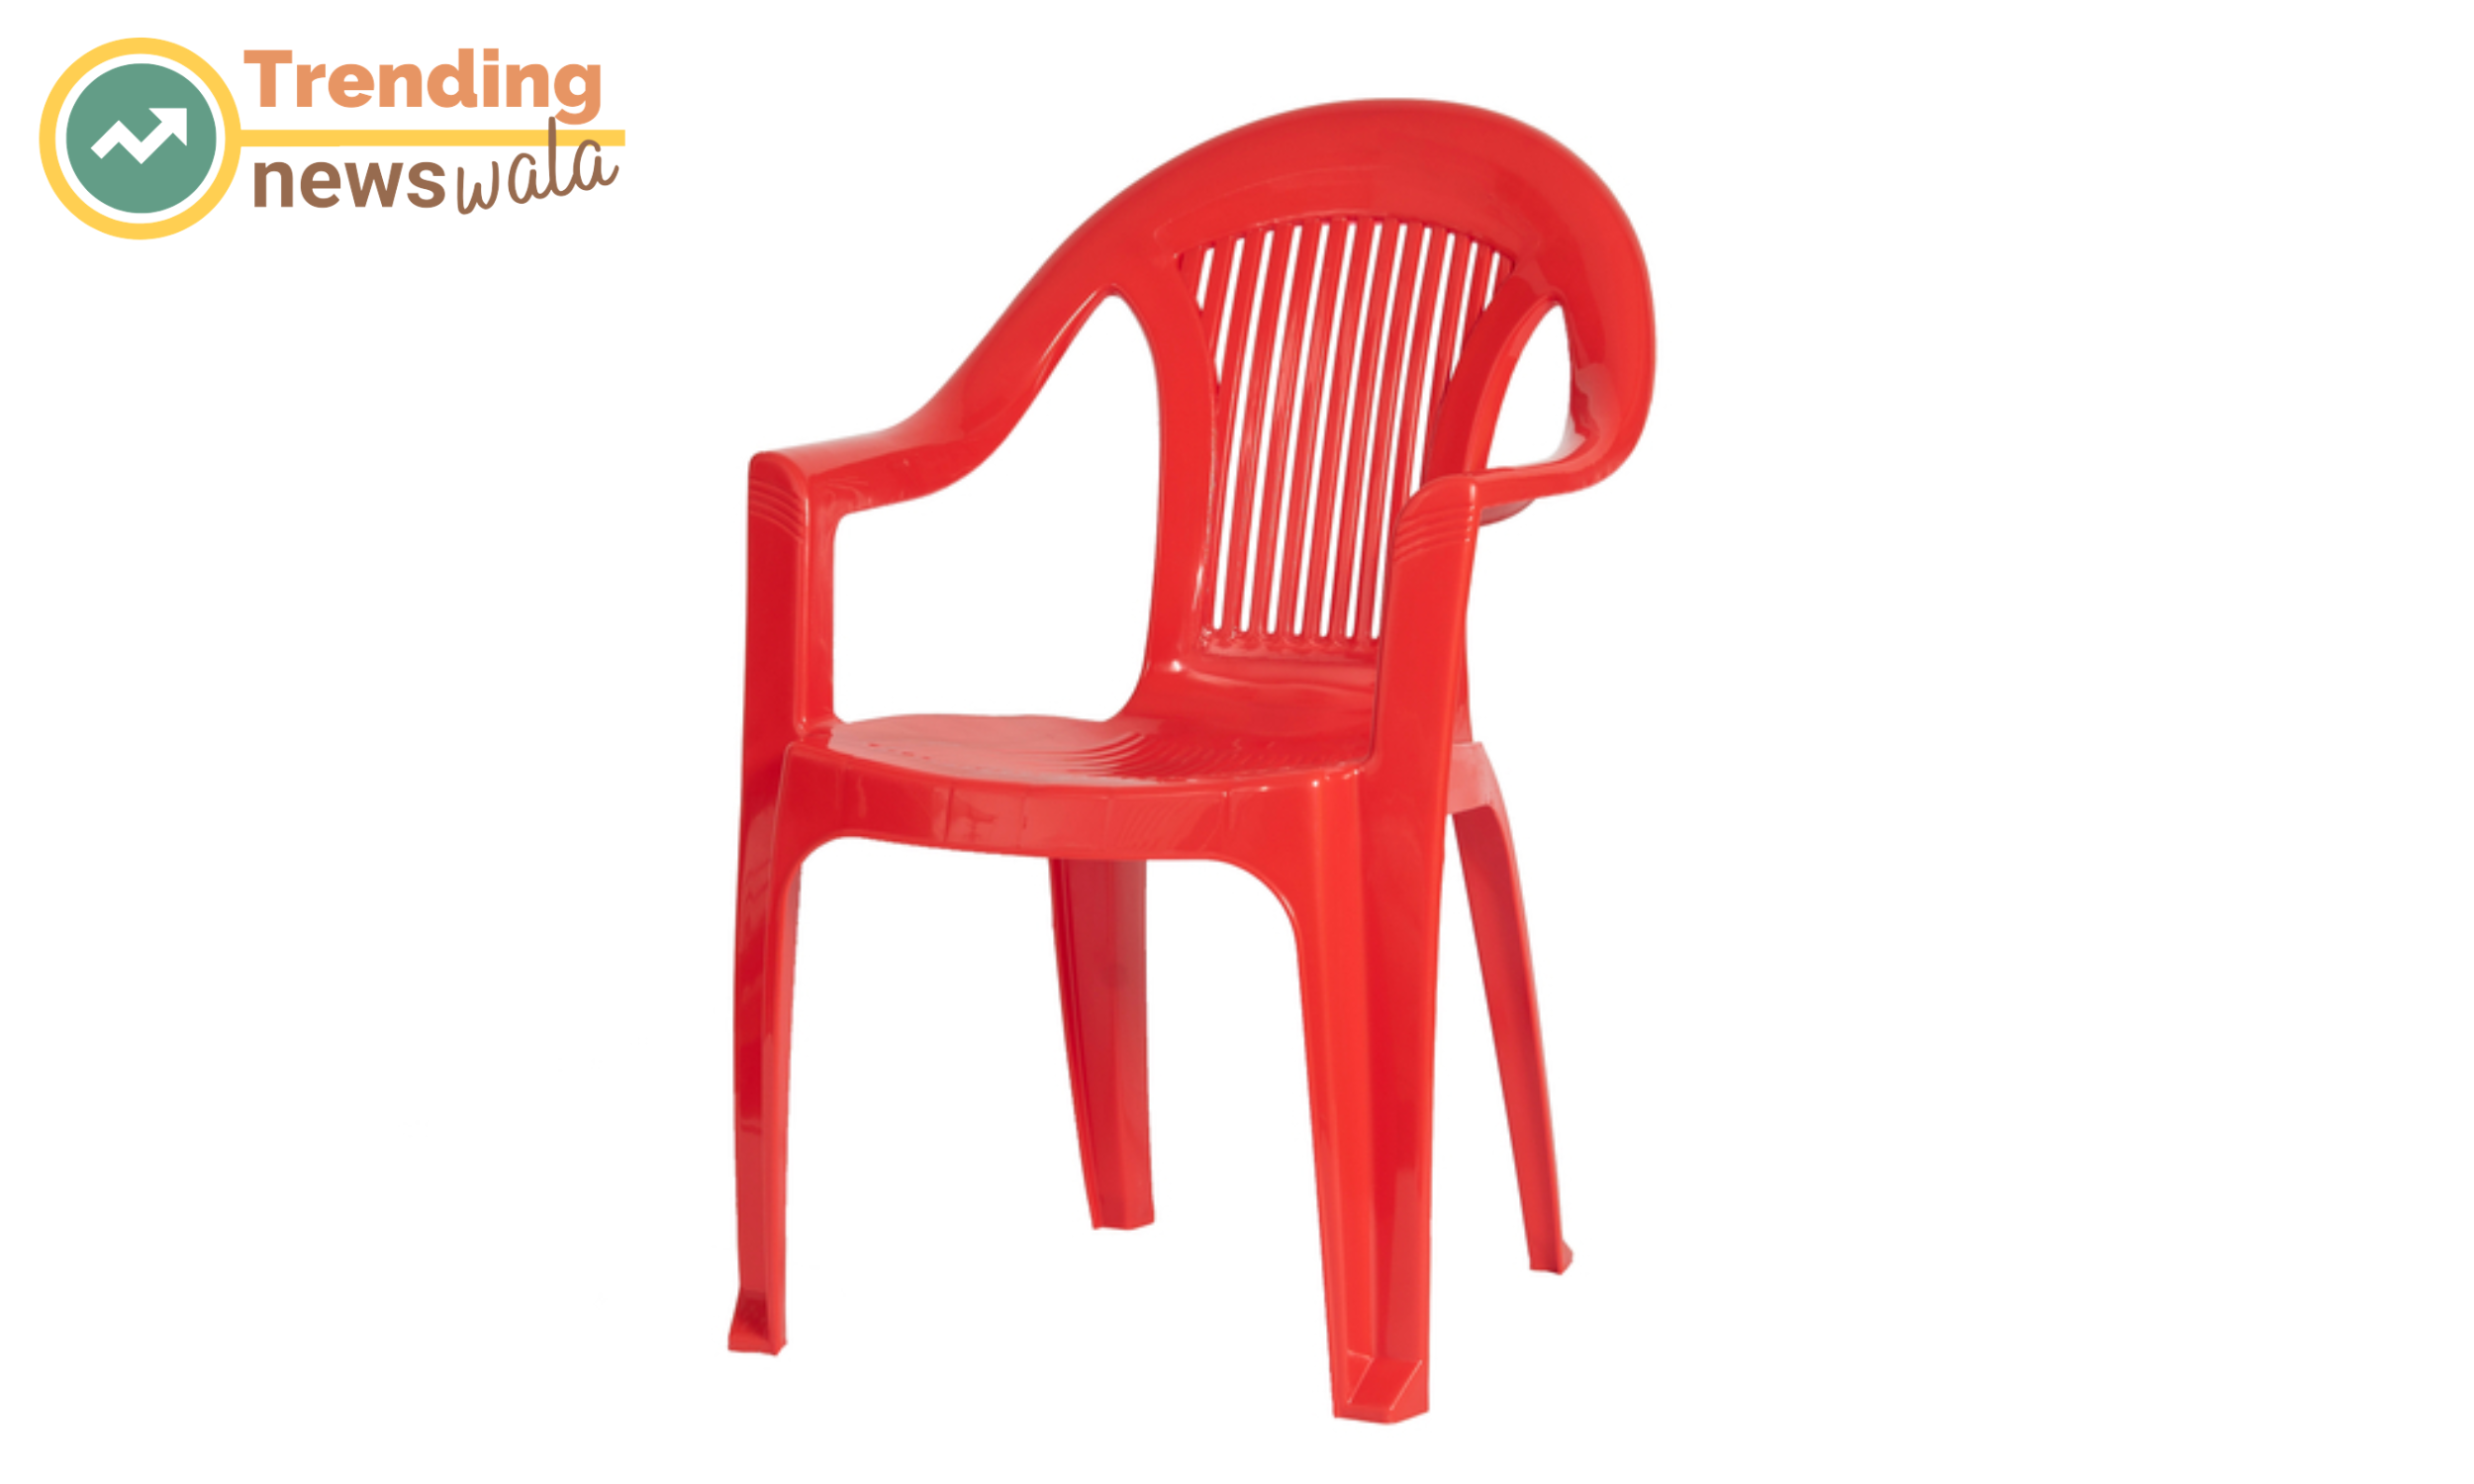 Molded plastic chairs bring a touch of classic elegance to any setting